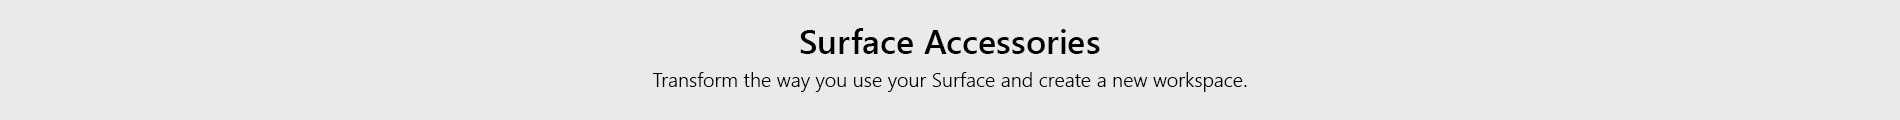 Microsoft Surface Store Revamp Acc Tile Grey